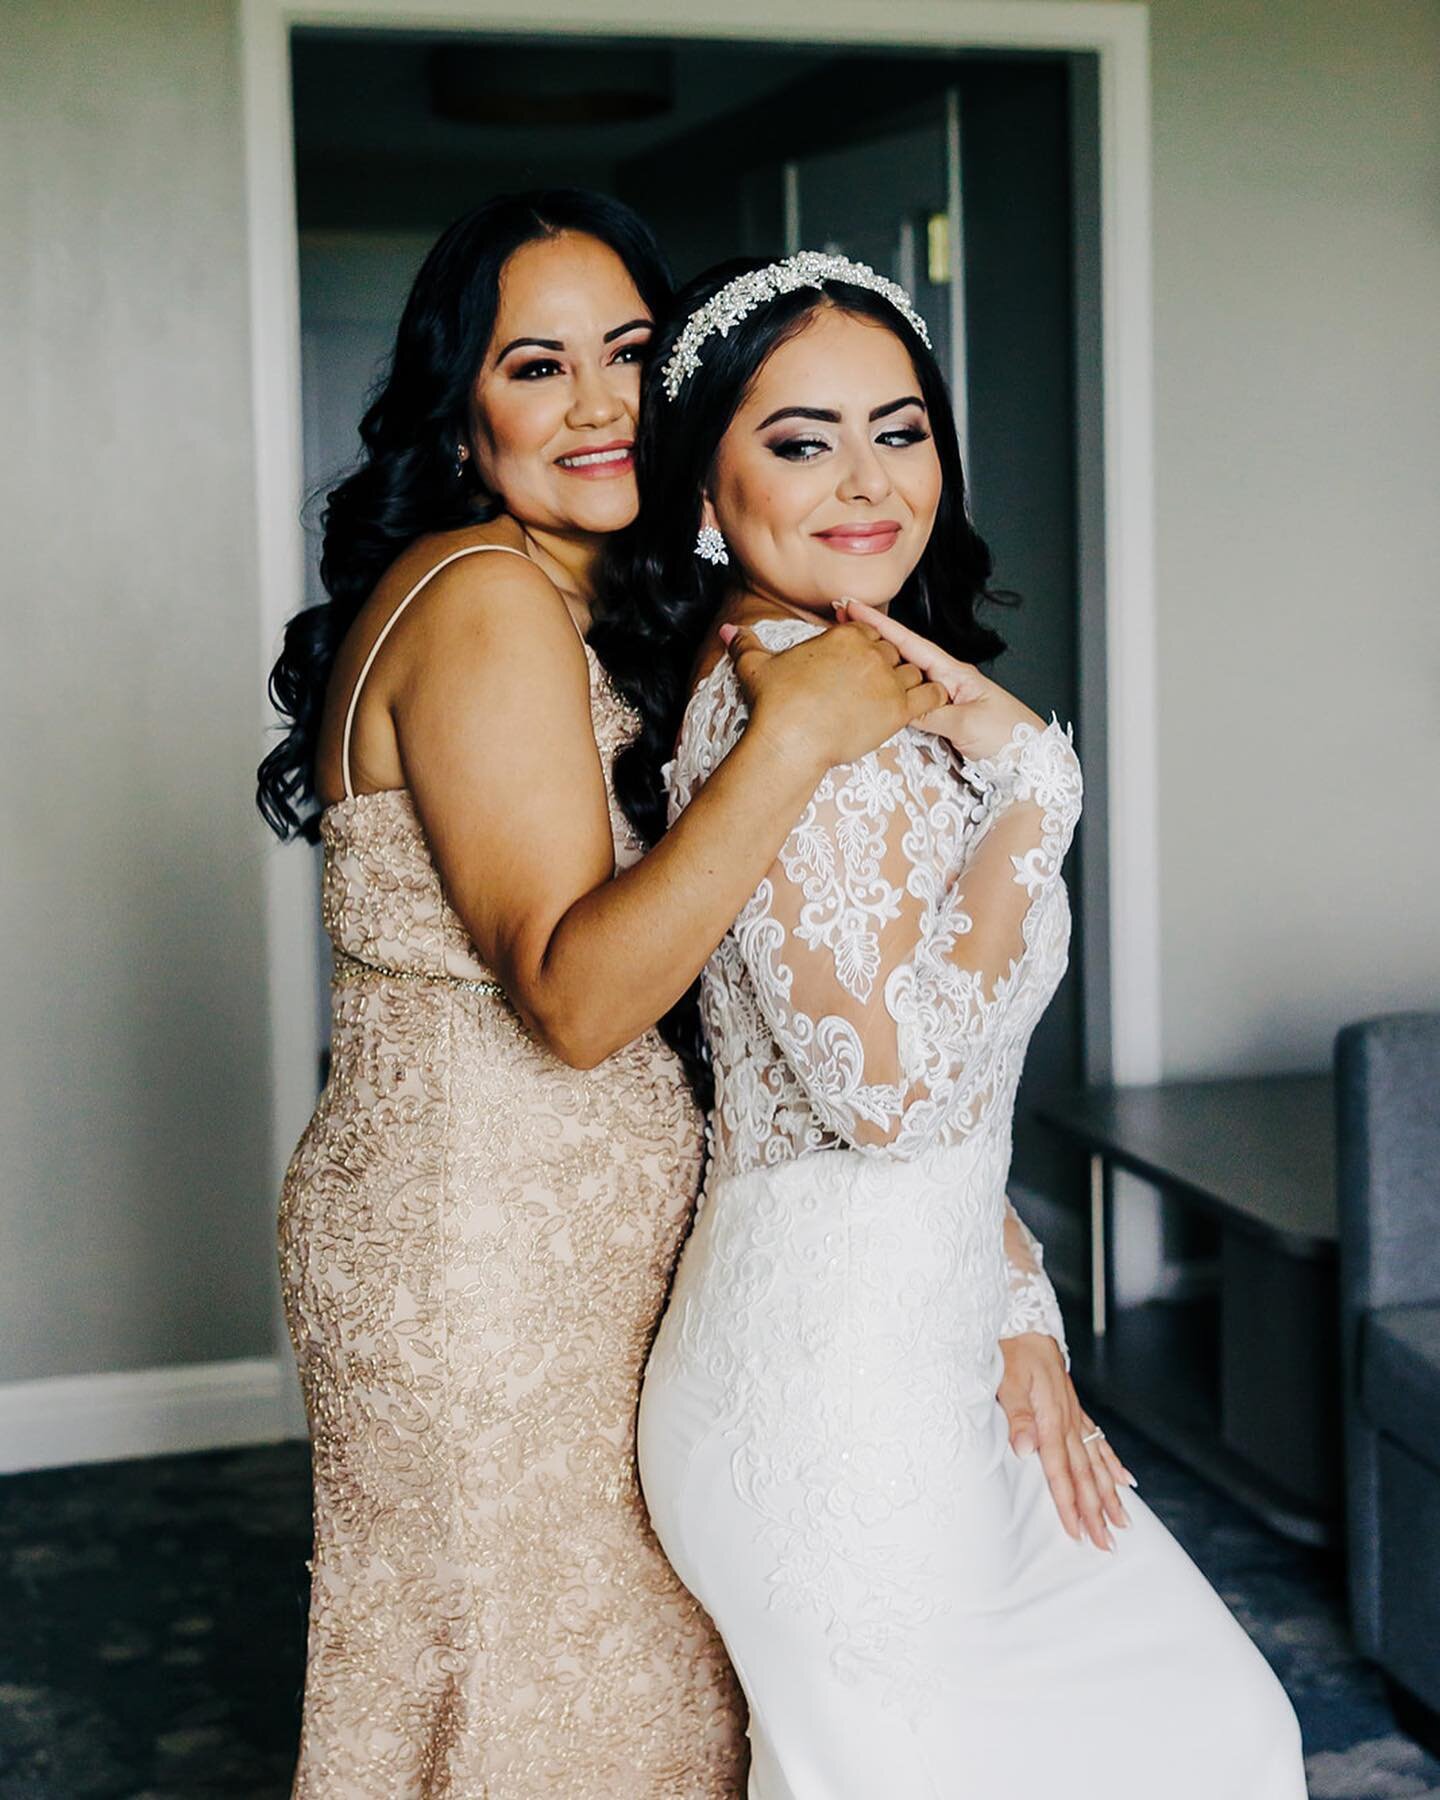 Mother&rsquo;s Day is around the corner, so its time to tell her how much you love and appreciate her! 

The moments between a mama and her daughter on a wedding day is very special and sentimental so we decided to share some of our fave MOB/Bride sn